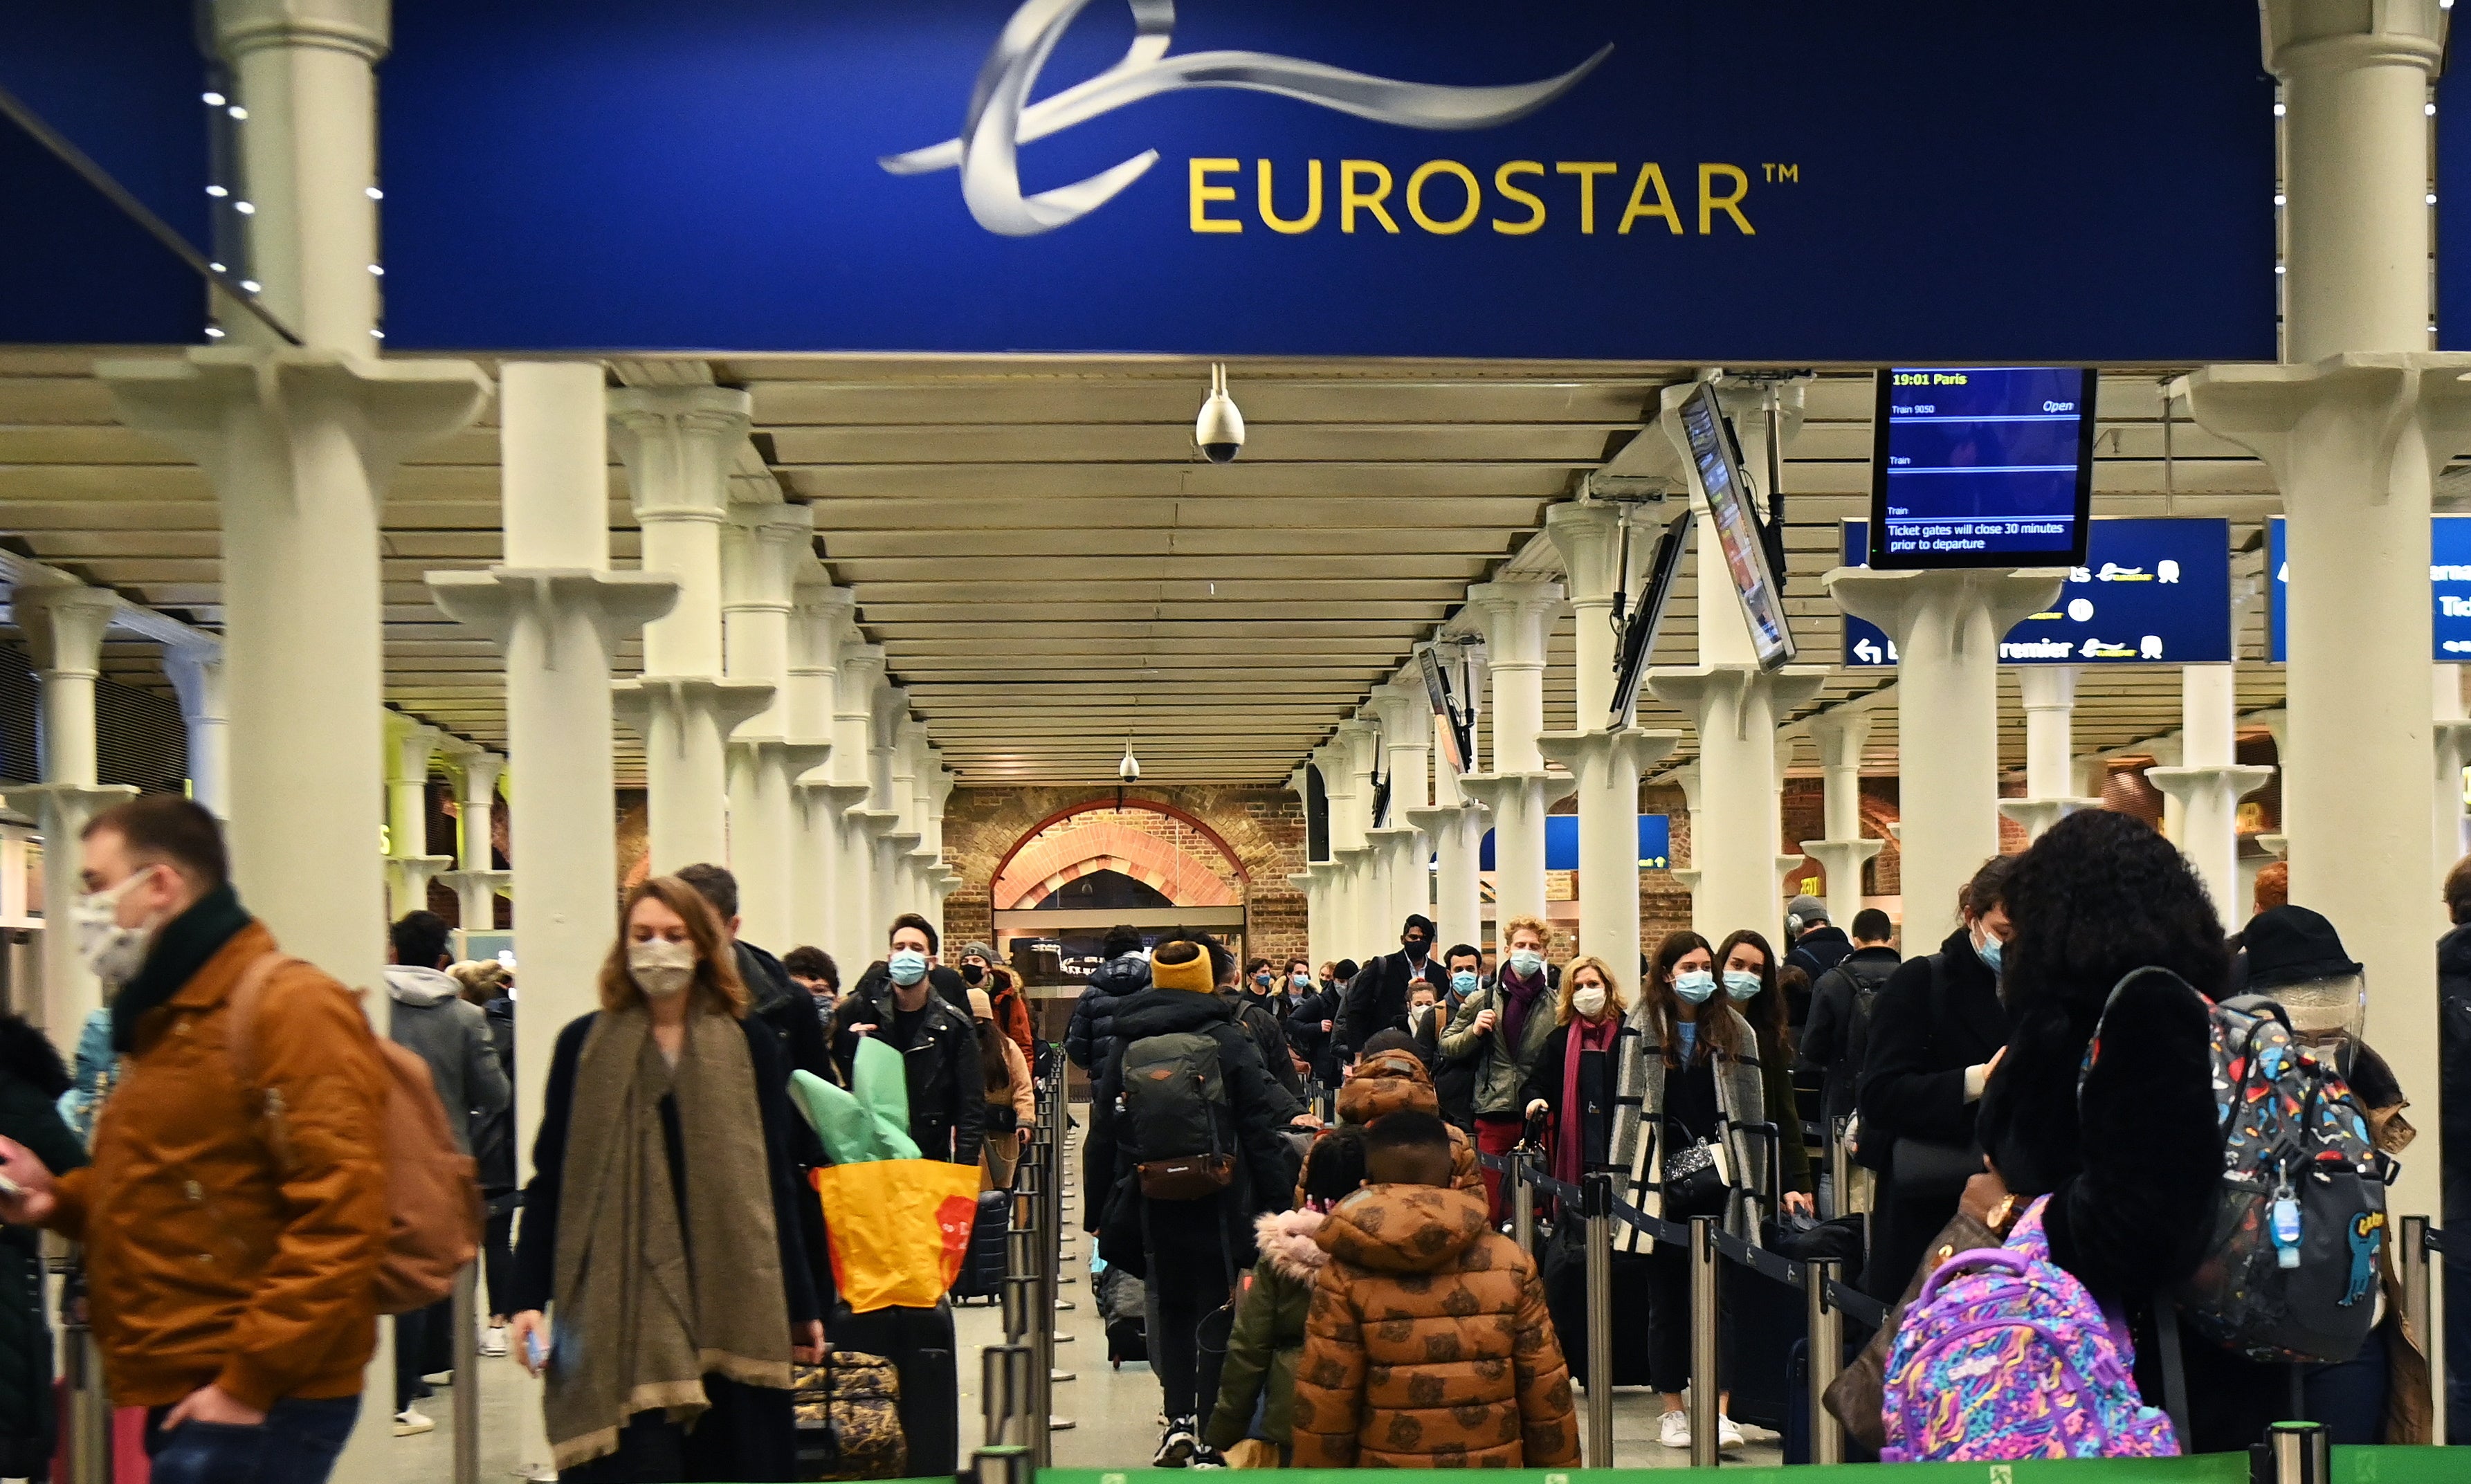 Arriving soon: Eurostar links from Paris to London are running without restrictions&nbsp;